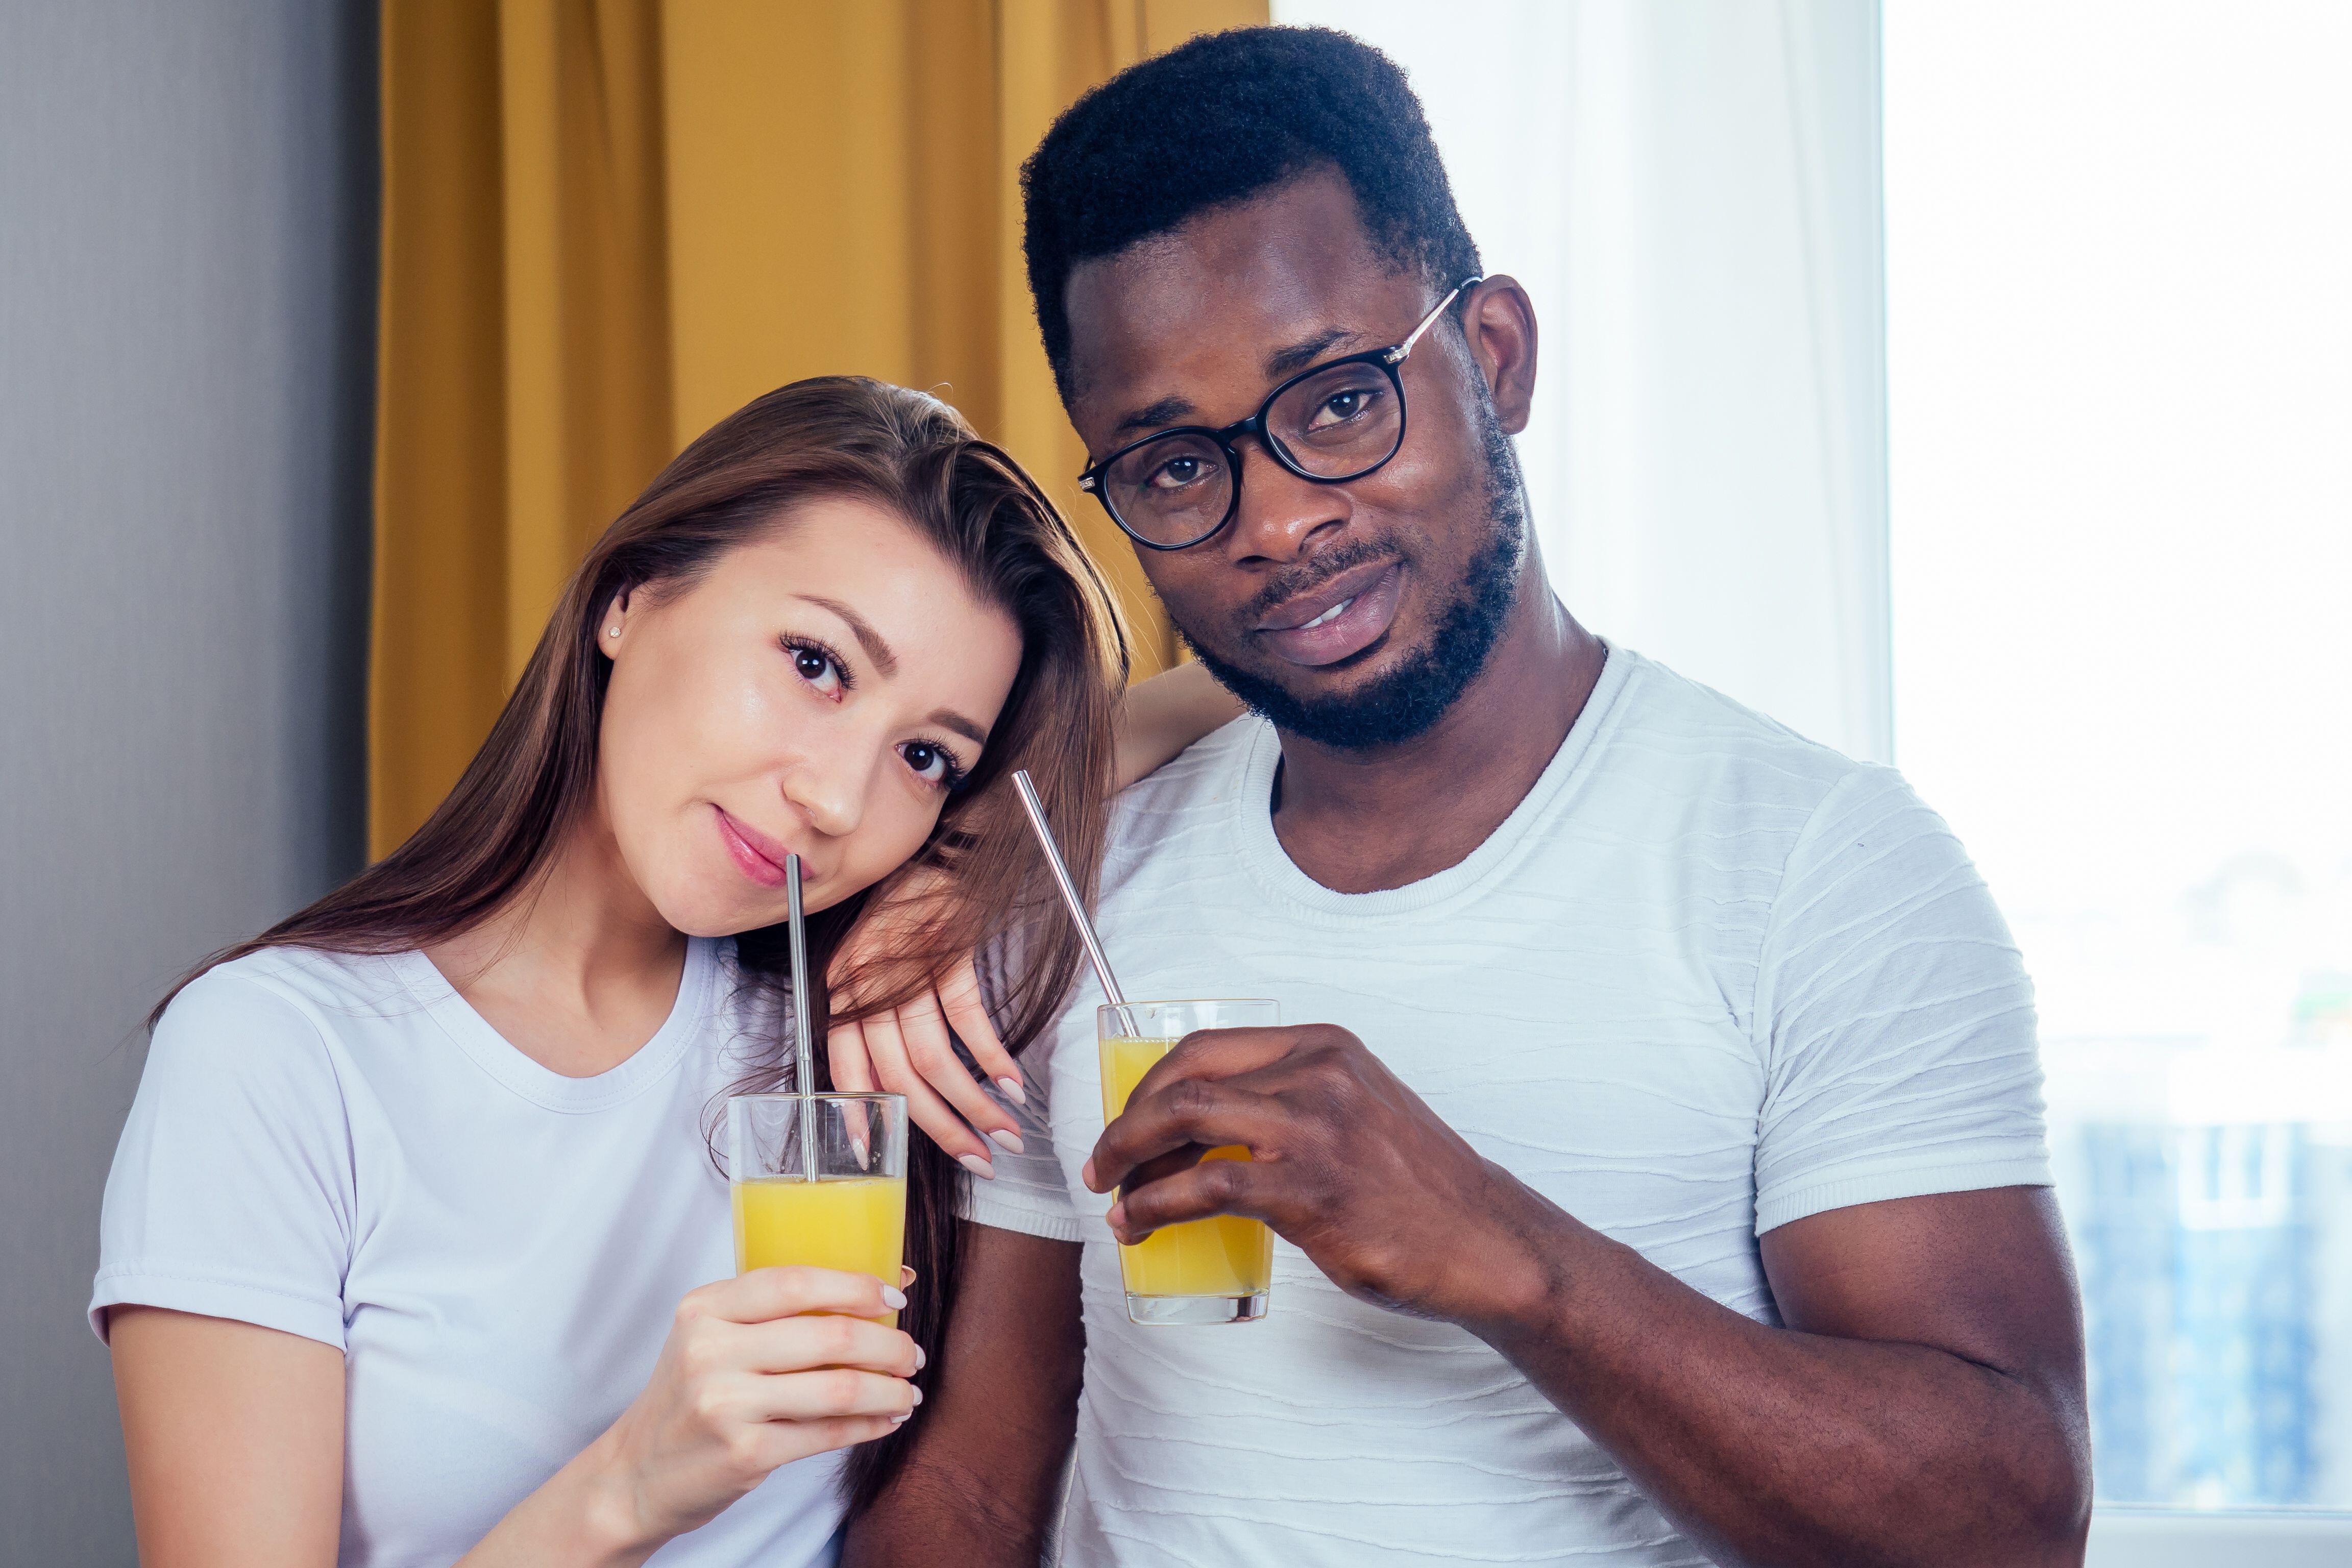 Get creative with couple’s cocktails (Alamy/PA)